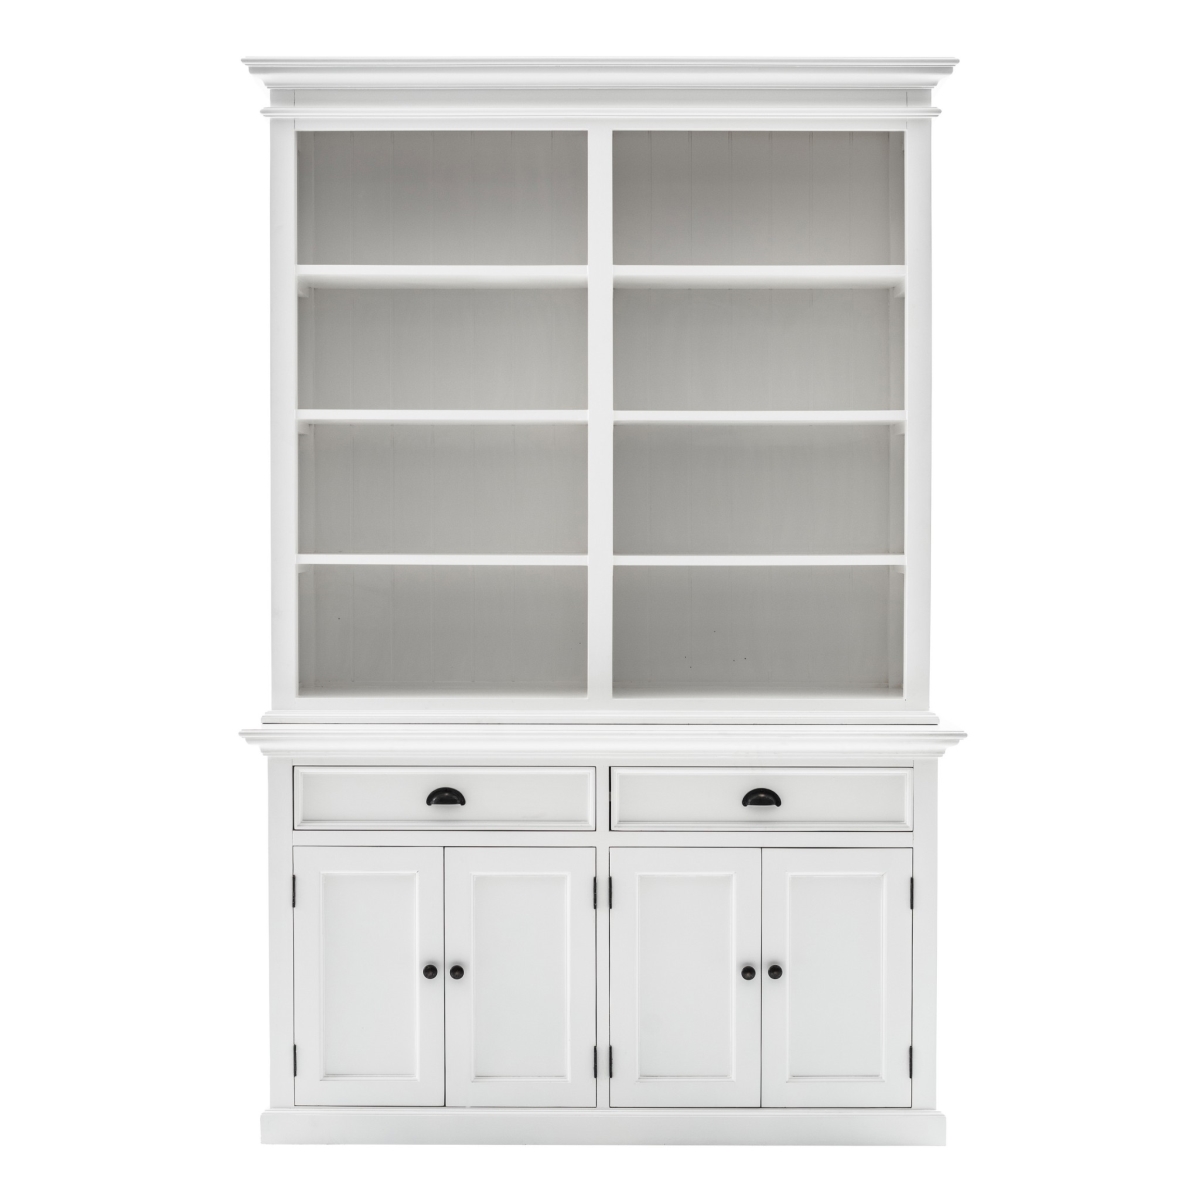 Picture of HomeRoots 397123 86.61 x 57.09 x 19.69 in. Classic White Buffet Hutch Unit with 8 Shelves